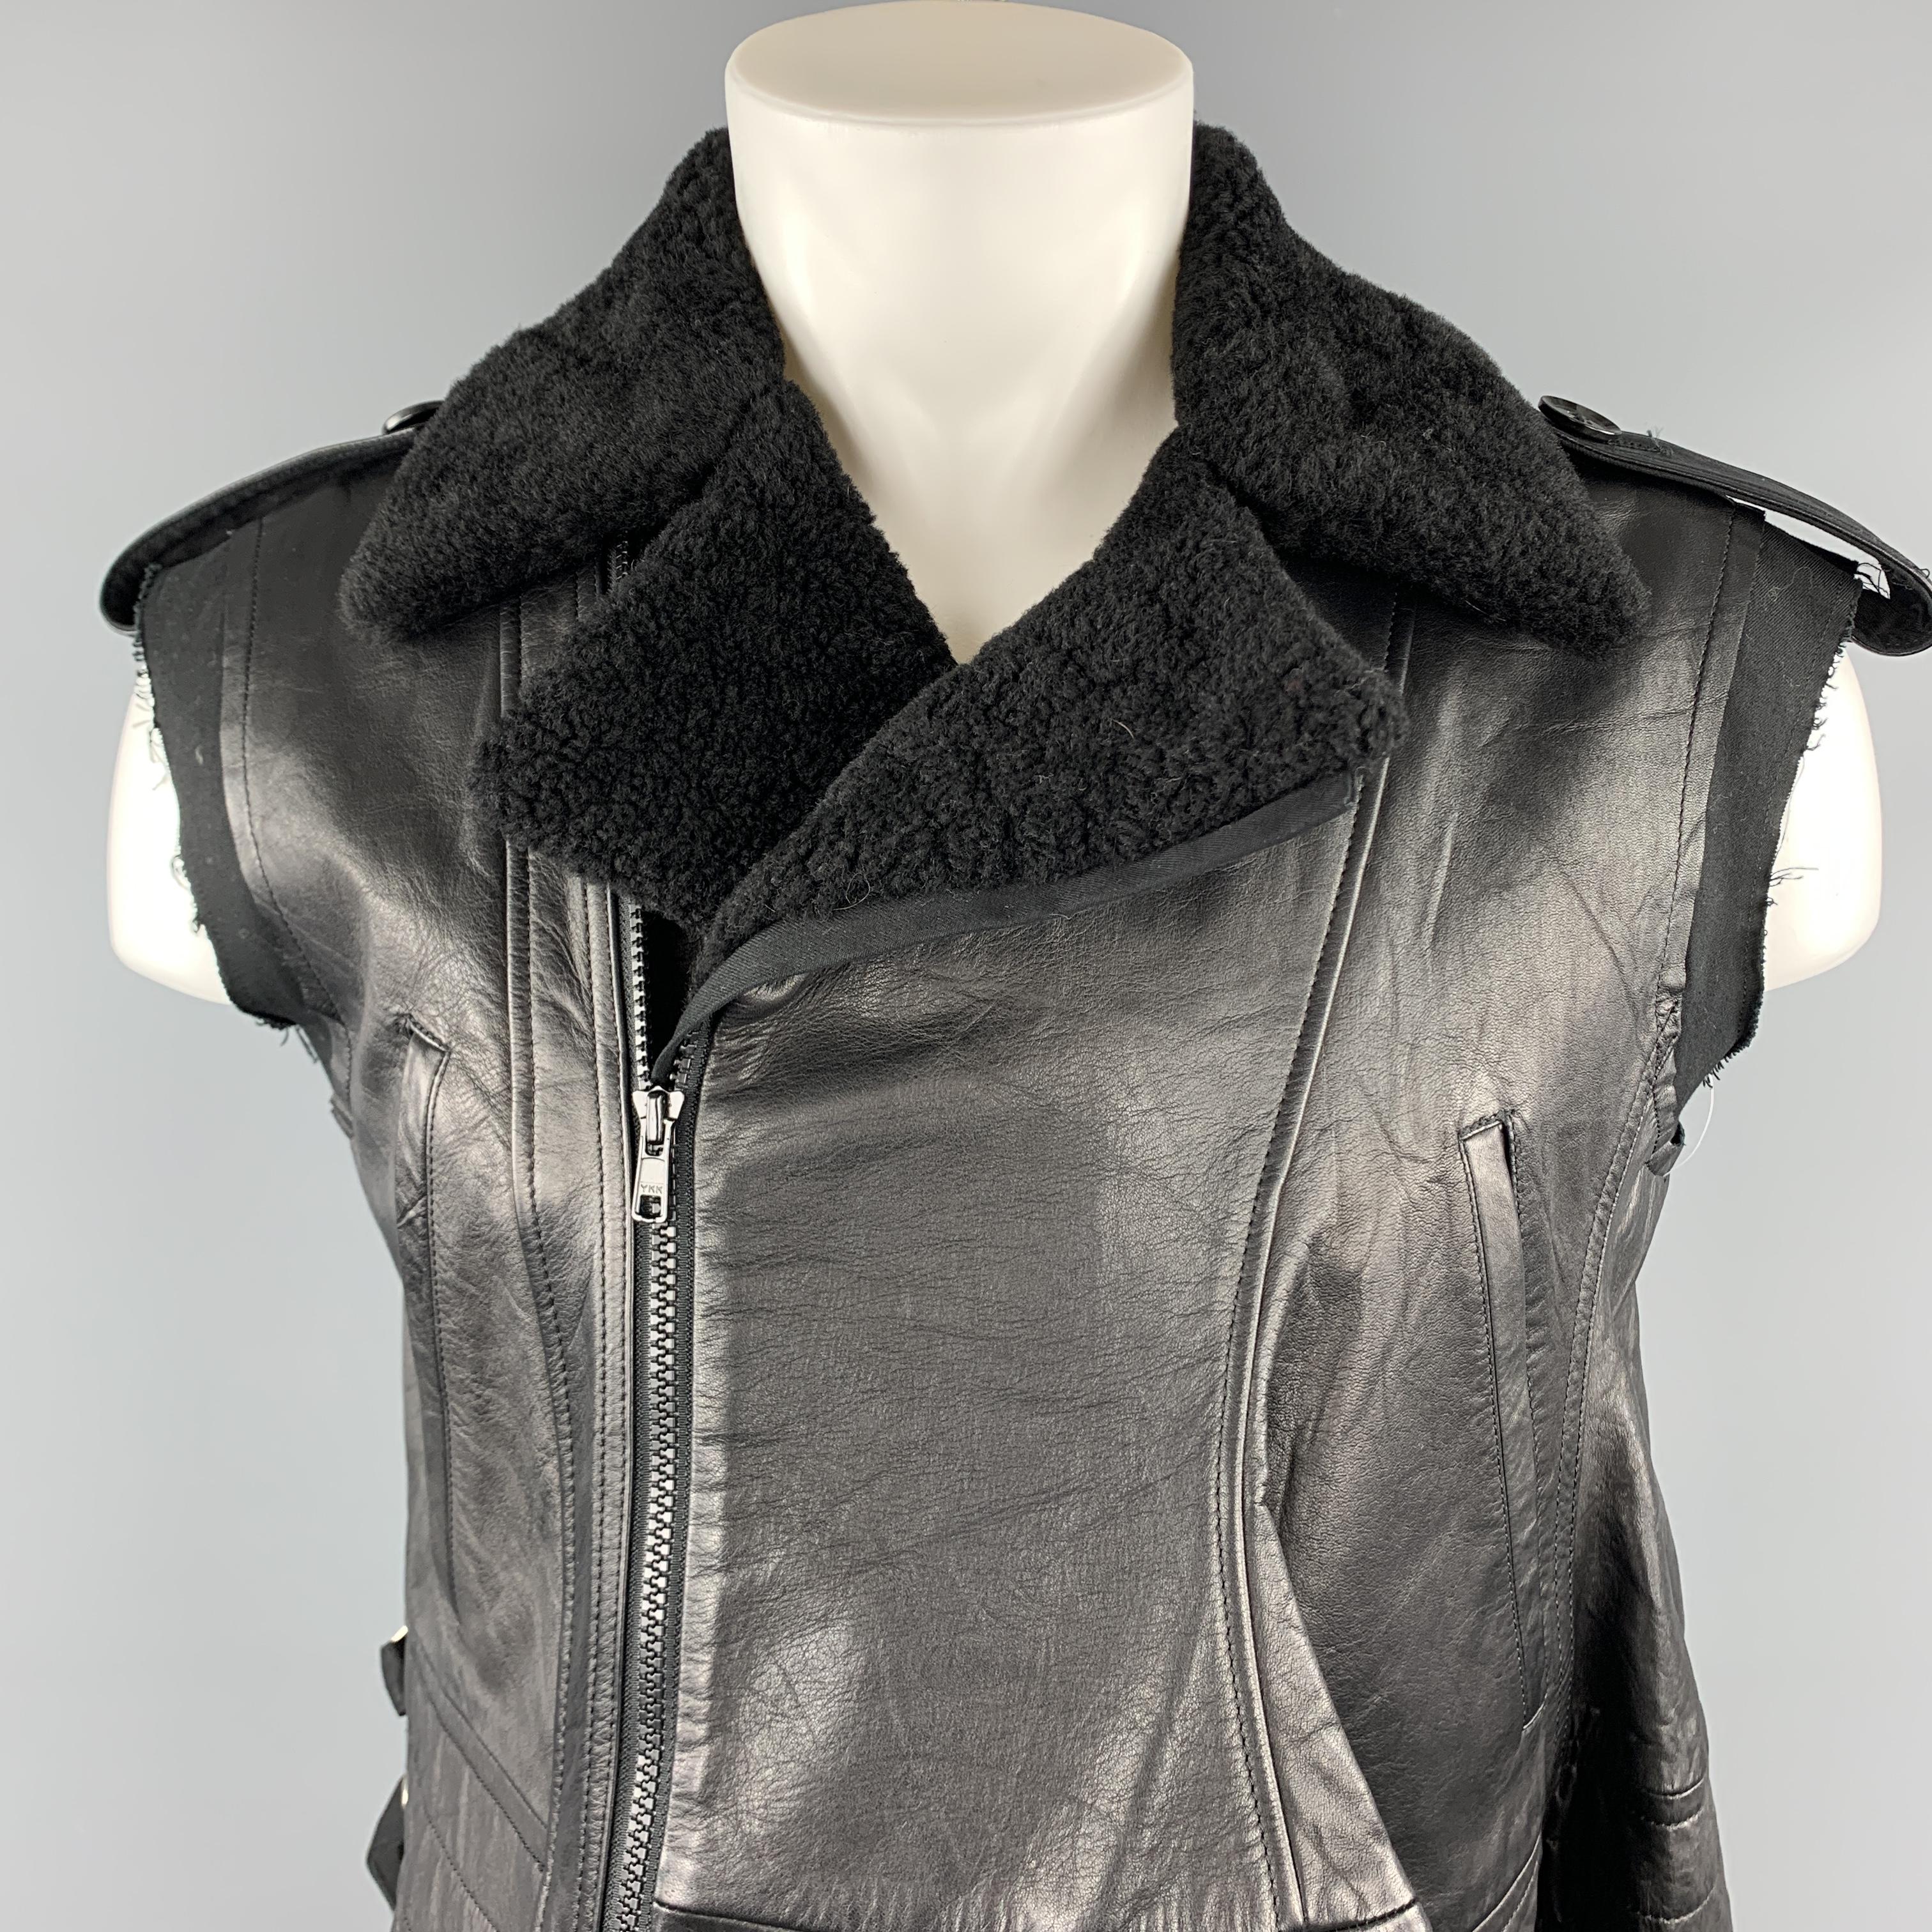 Women's YOHJI YAMAMOTO vest comes in a black sheep skin leather featuring a biker style, distressed cut sleeves, contrast stitching, slit pockets, and a full zip closure. Made in Japan. 

Excellent Pre-Owned Condition.
Marked: JP